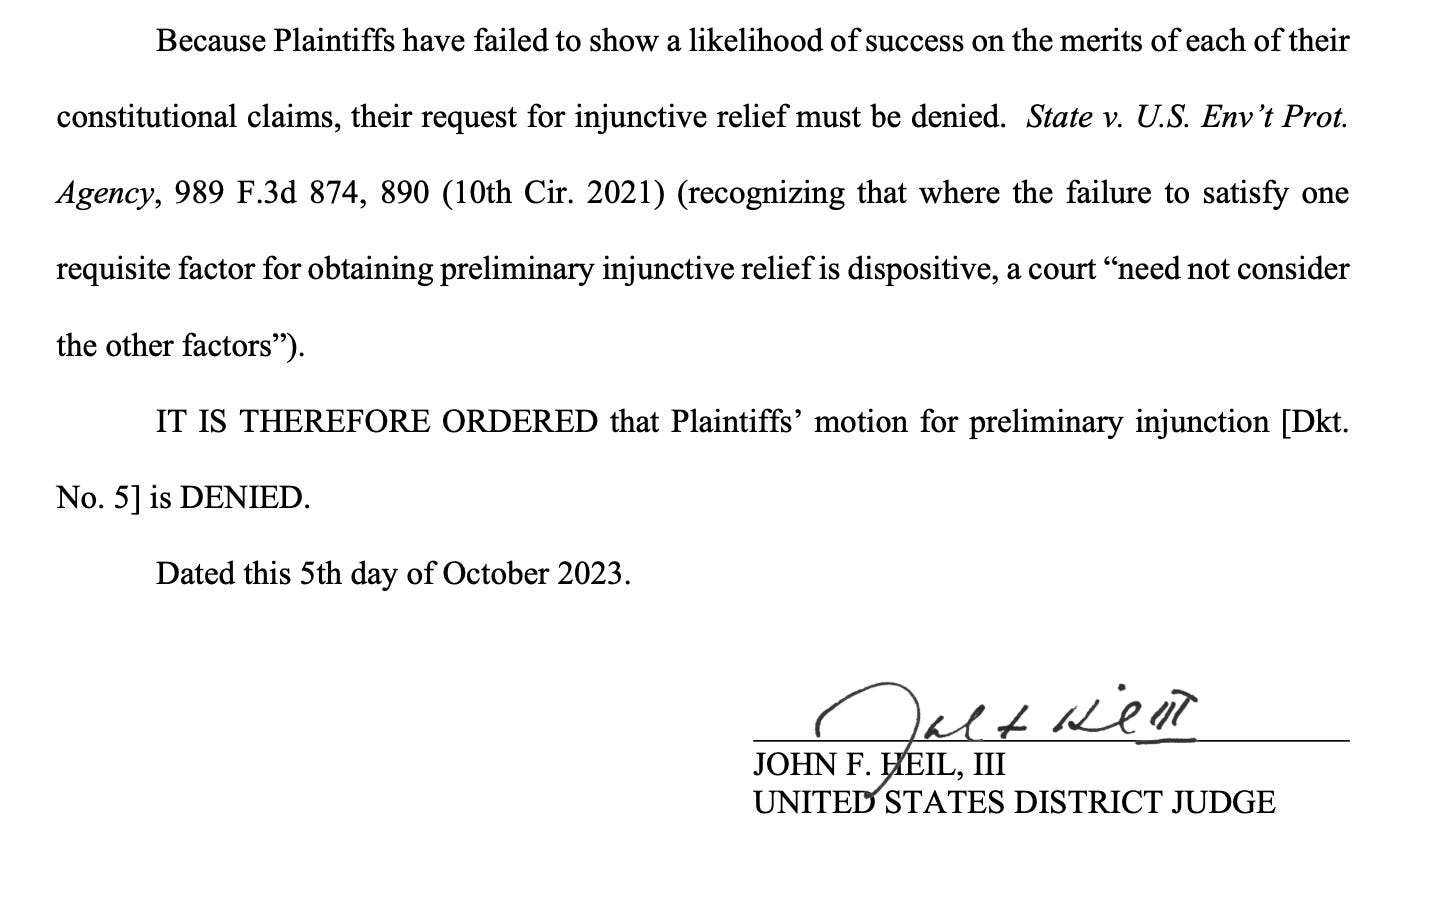 Because Plaintiffs have failed to show a likelihood of success on the merits of each of their constitutional claims, their request for injunctive relief must be denied. State v. U.S. Env’t Prot. Agency, 989 F.3d 874, 890 (10th Cir. 2021) (recognizing that where the failure to satisfy one requisite factor for obtaining preliminary injunctive relief is dispositive, a court “need not consider the other factors”). IT IS THEREFORE ORDERED that Plaintiffs’ motion for preliminary injunction [Dkt. No. 5] is DENIED. Dated this 5th day of October 2023.